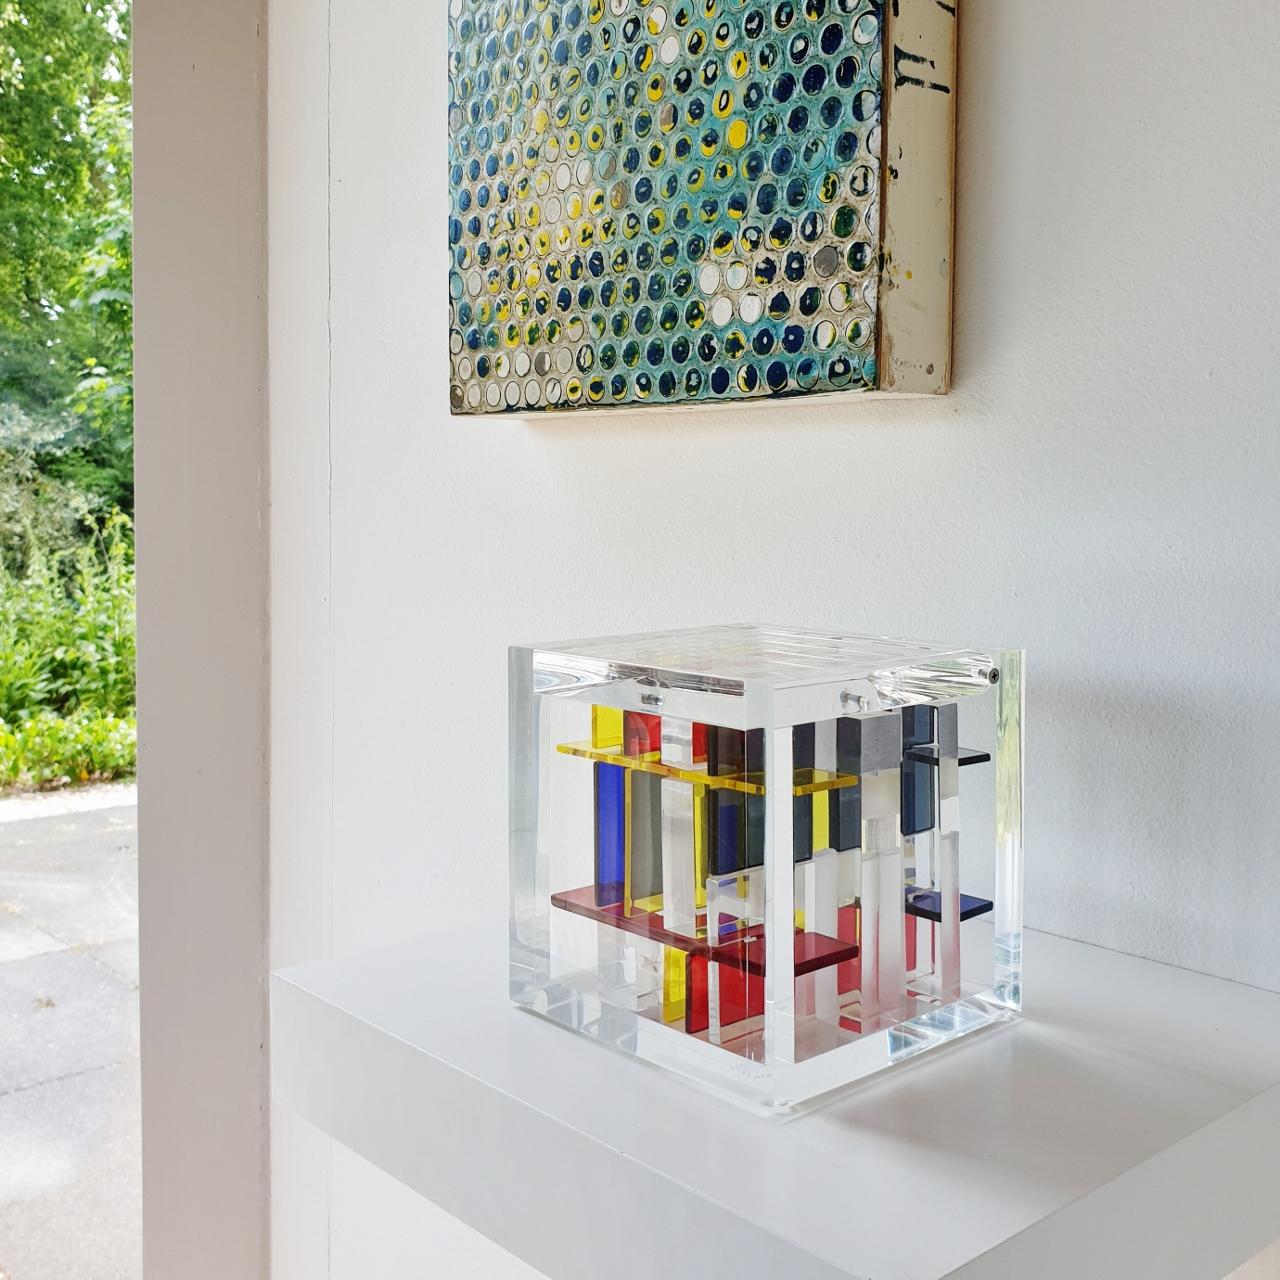 New York City - contemporary modern abstract geometric cube sculpture - Sculpture by Haringa + Olijve